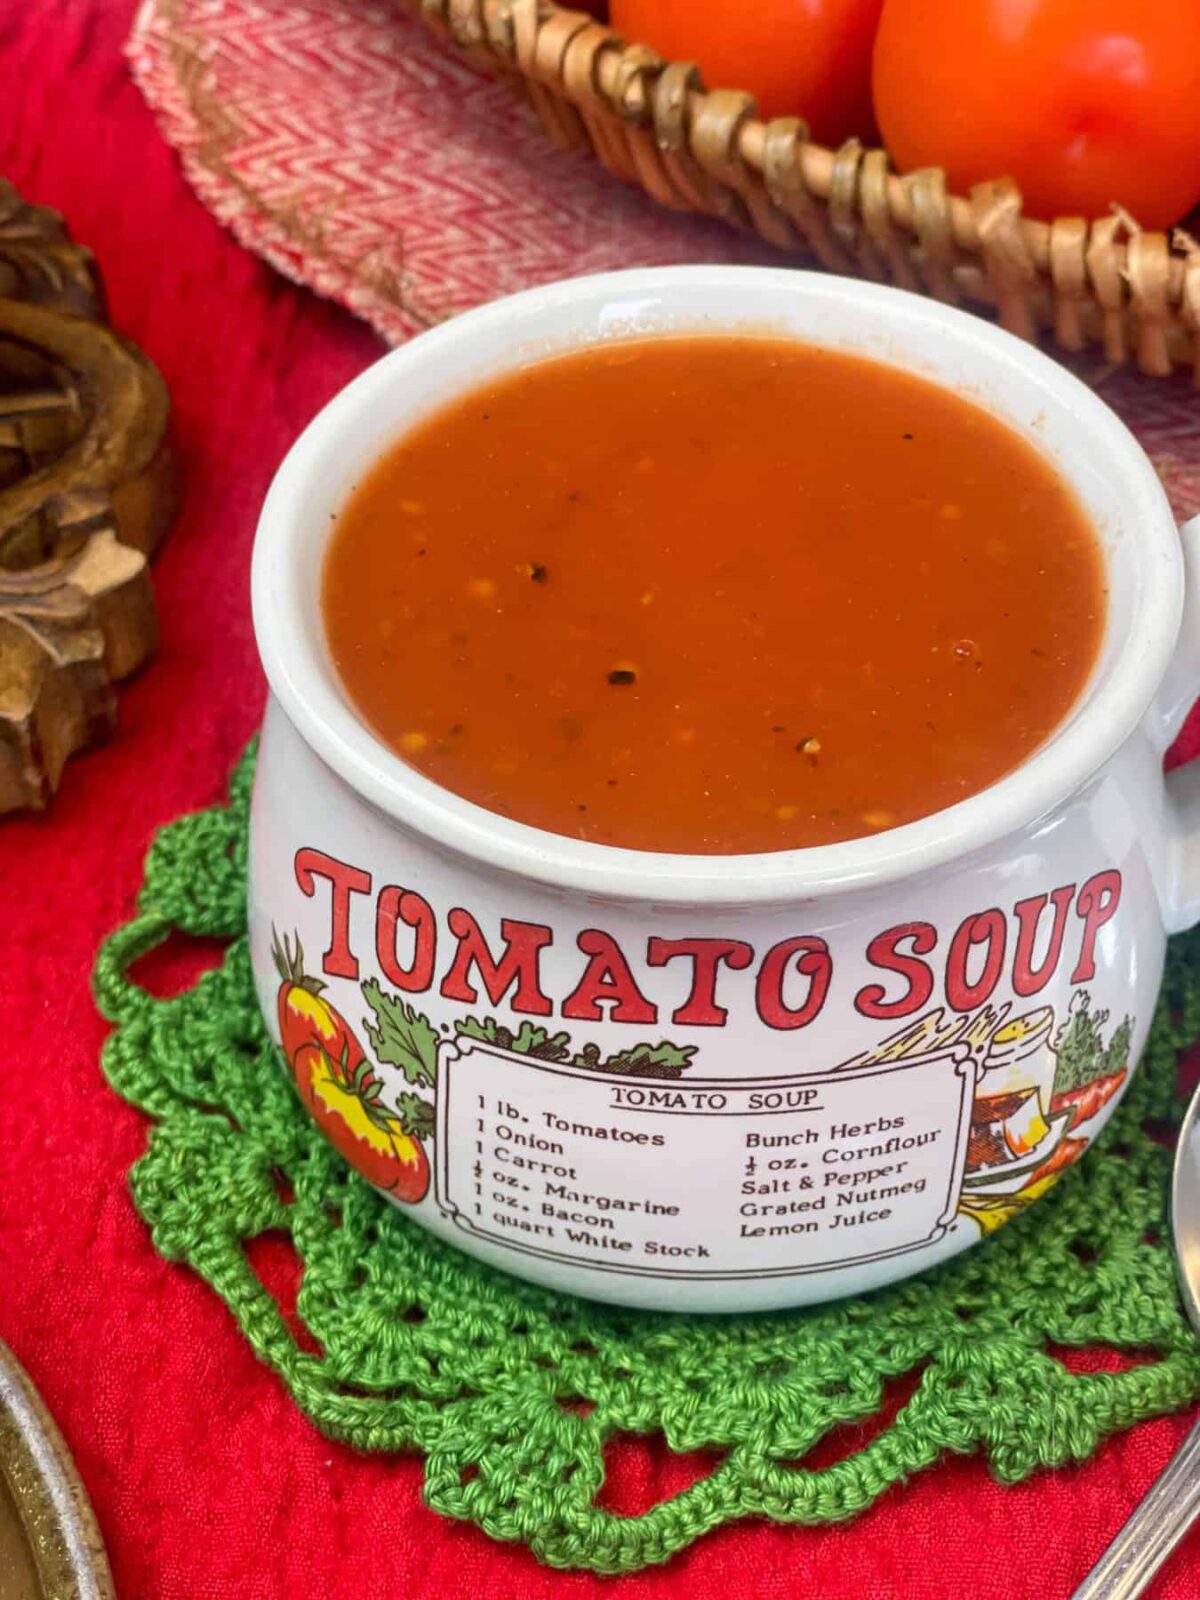 A soup mug with the text 'tomato soup' filled with soup, green doily napkin, red tablecloth, basket of fresh tomatoes to side.